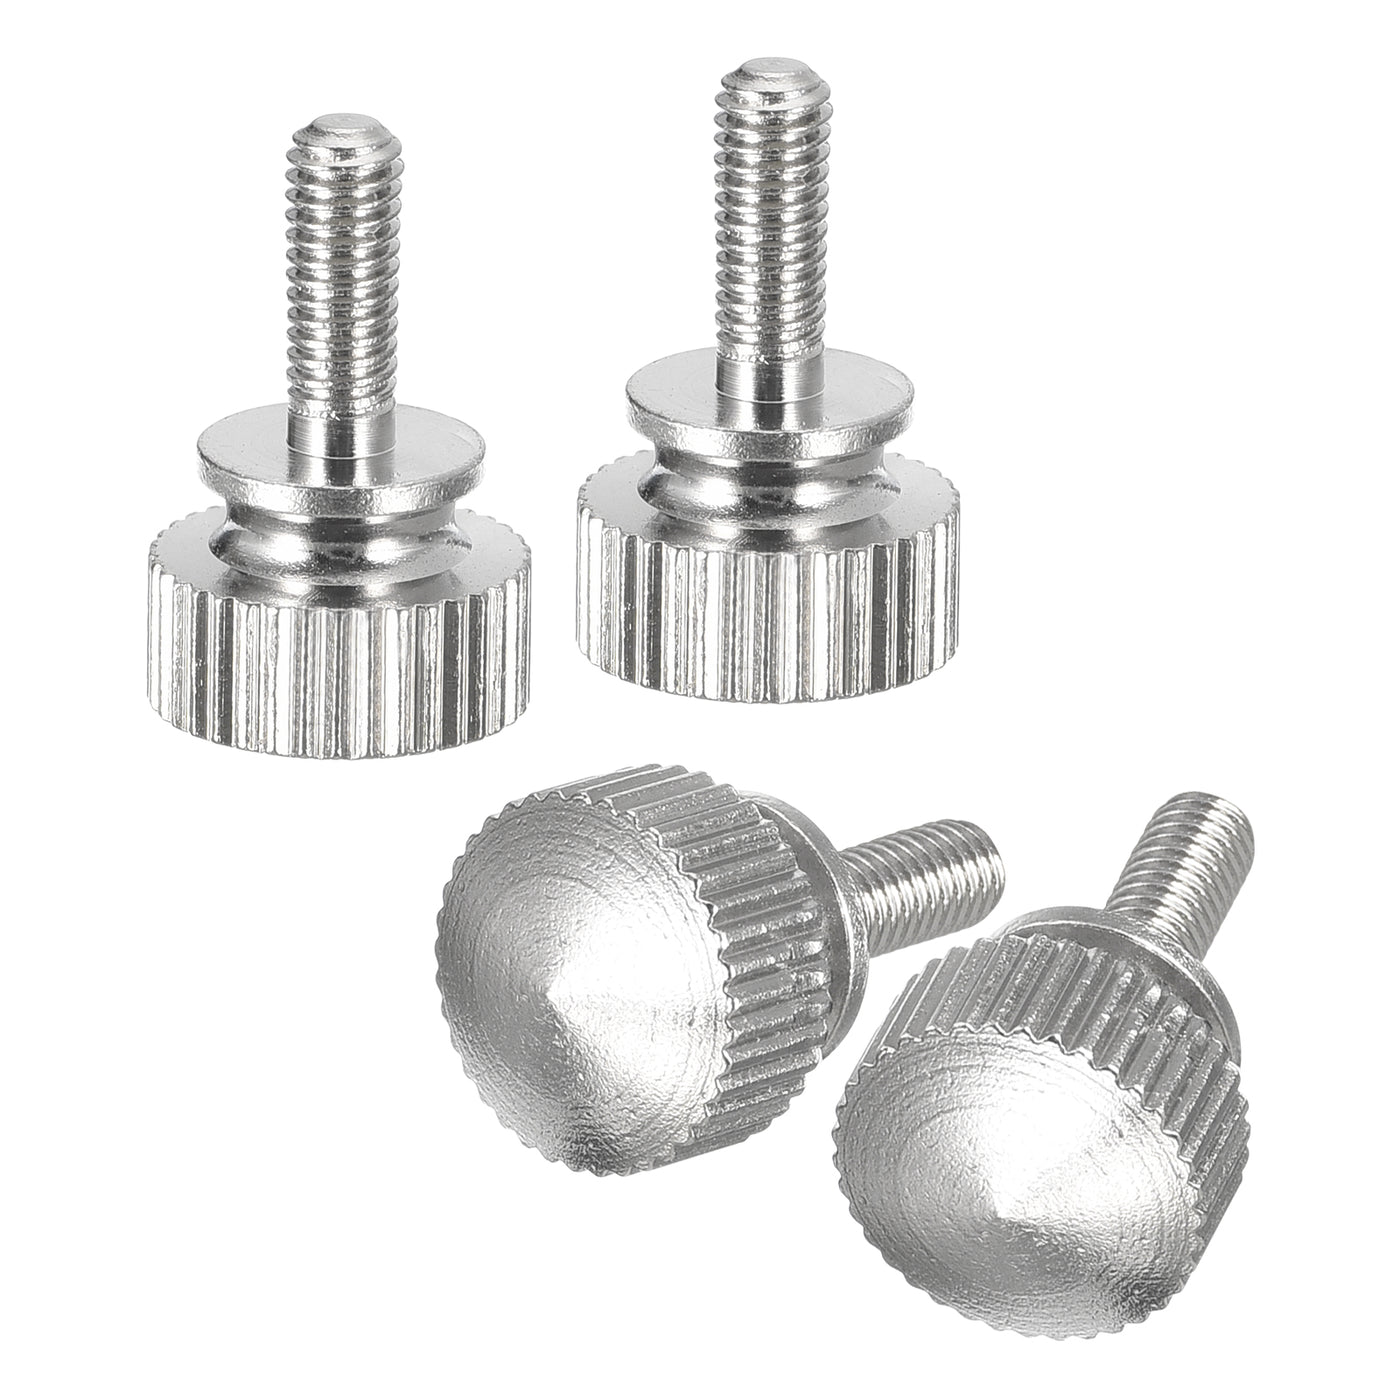 uxcell Uxcell M3x8mm Knurled Thumb Screws, 4pcs Brass Thumb Screws with Shoulder, Silver Tone